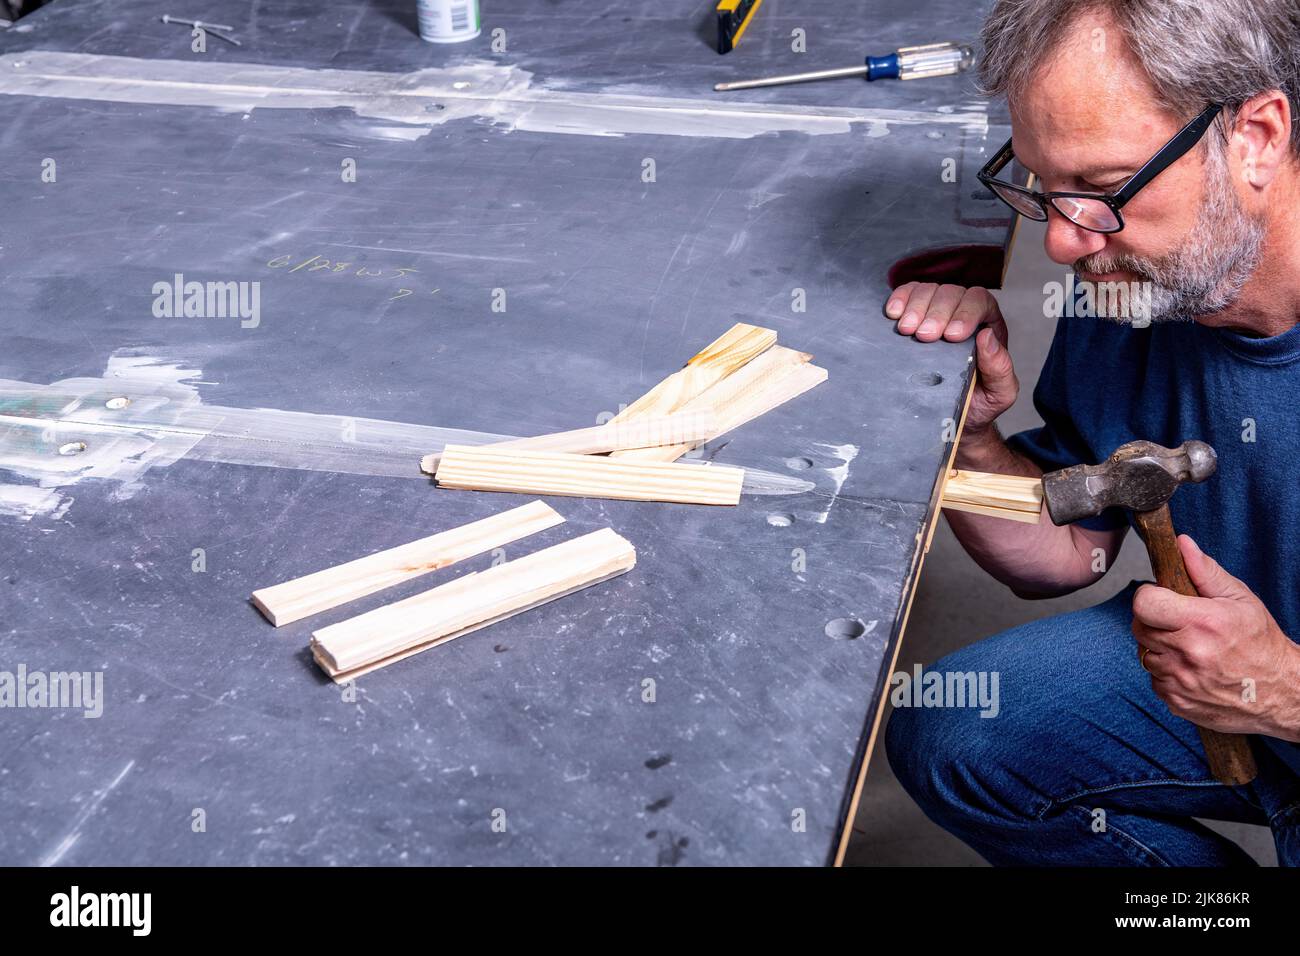 Professional work on a pool table installation Stock Photo